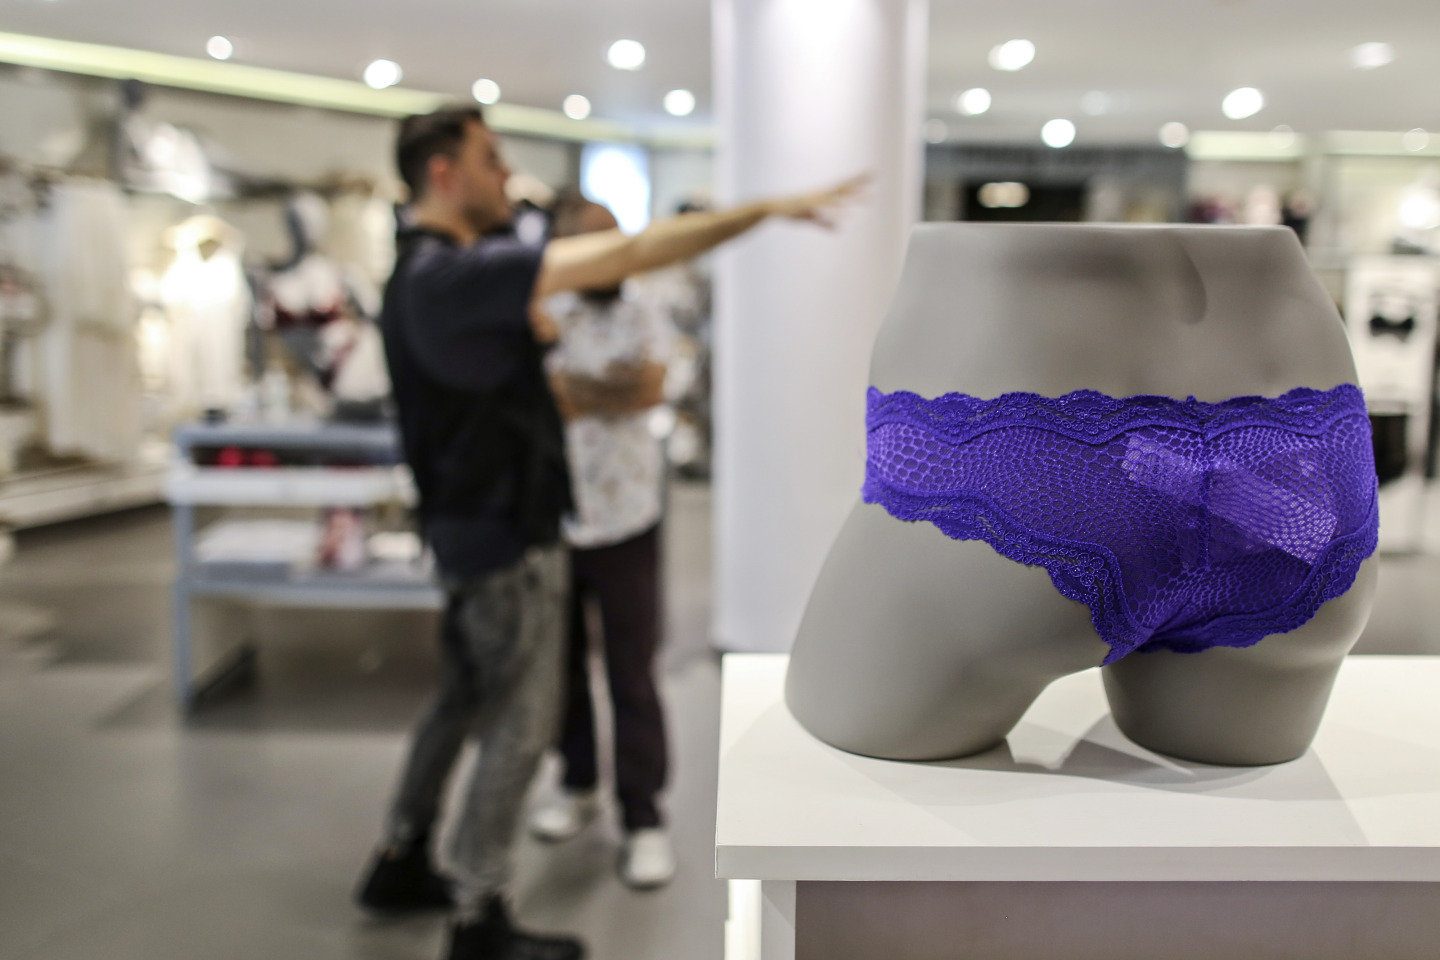 This New Underwear Is Scientifically Designed to Hide Your Farts